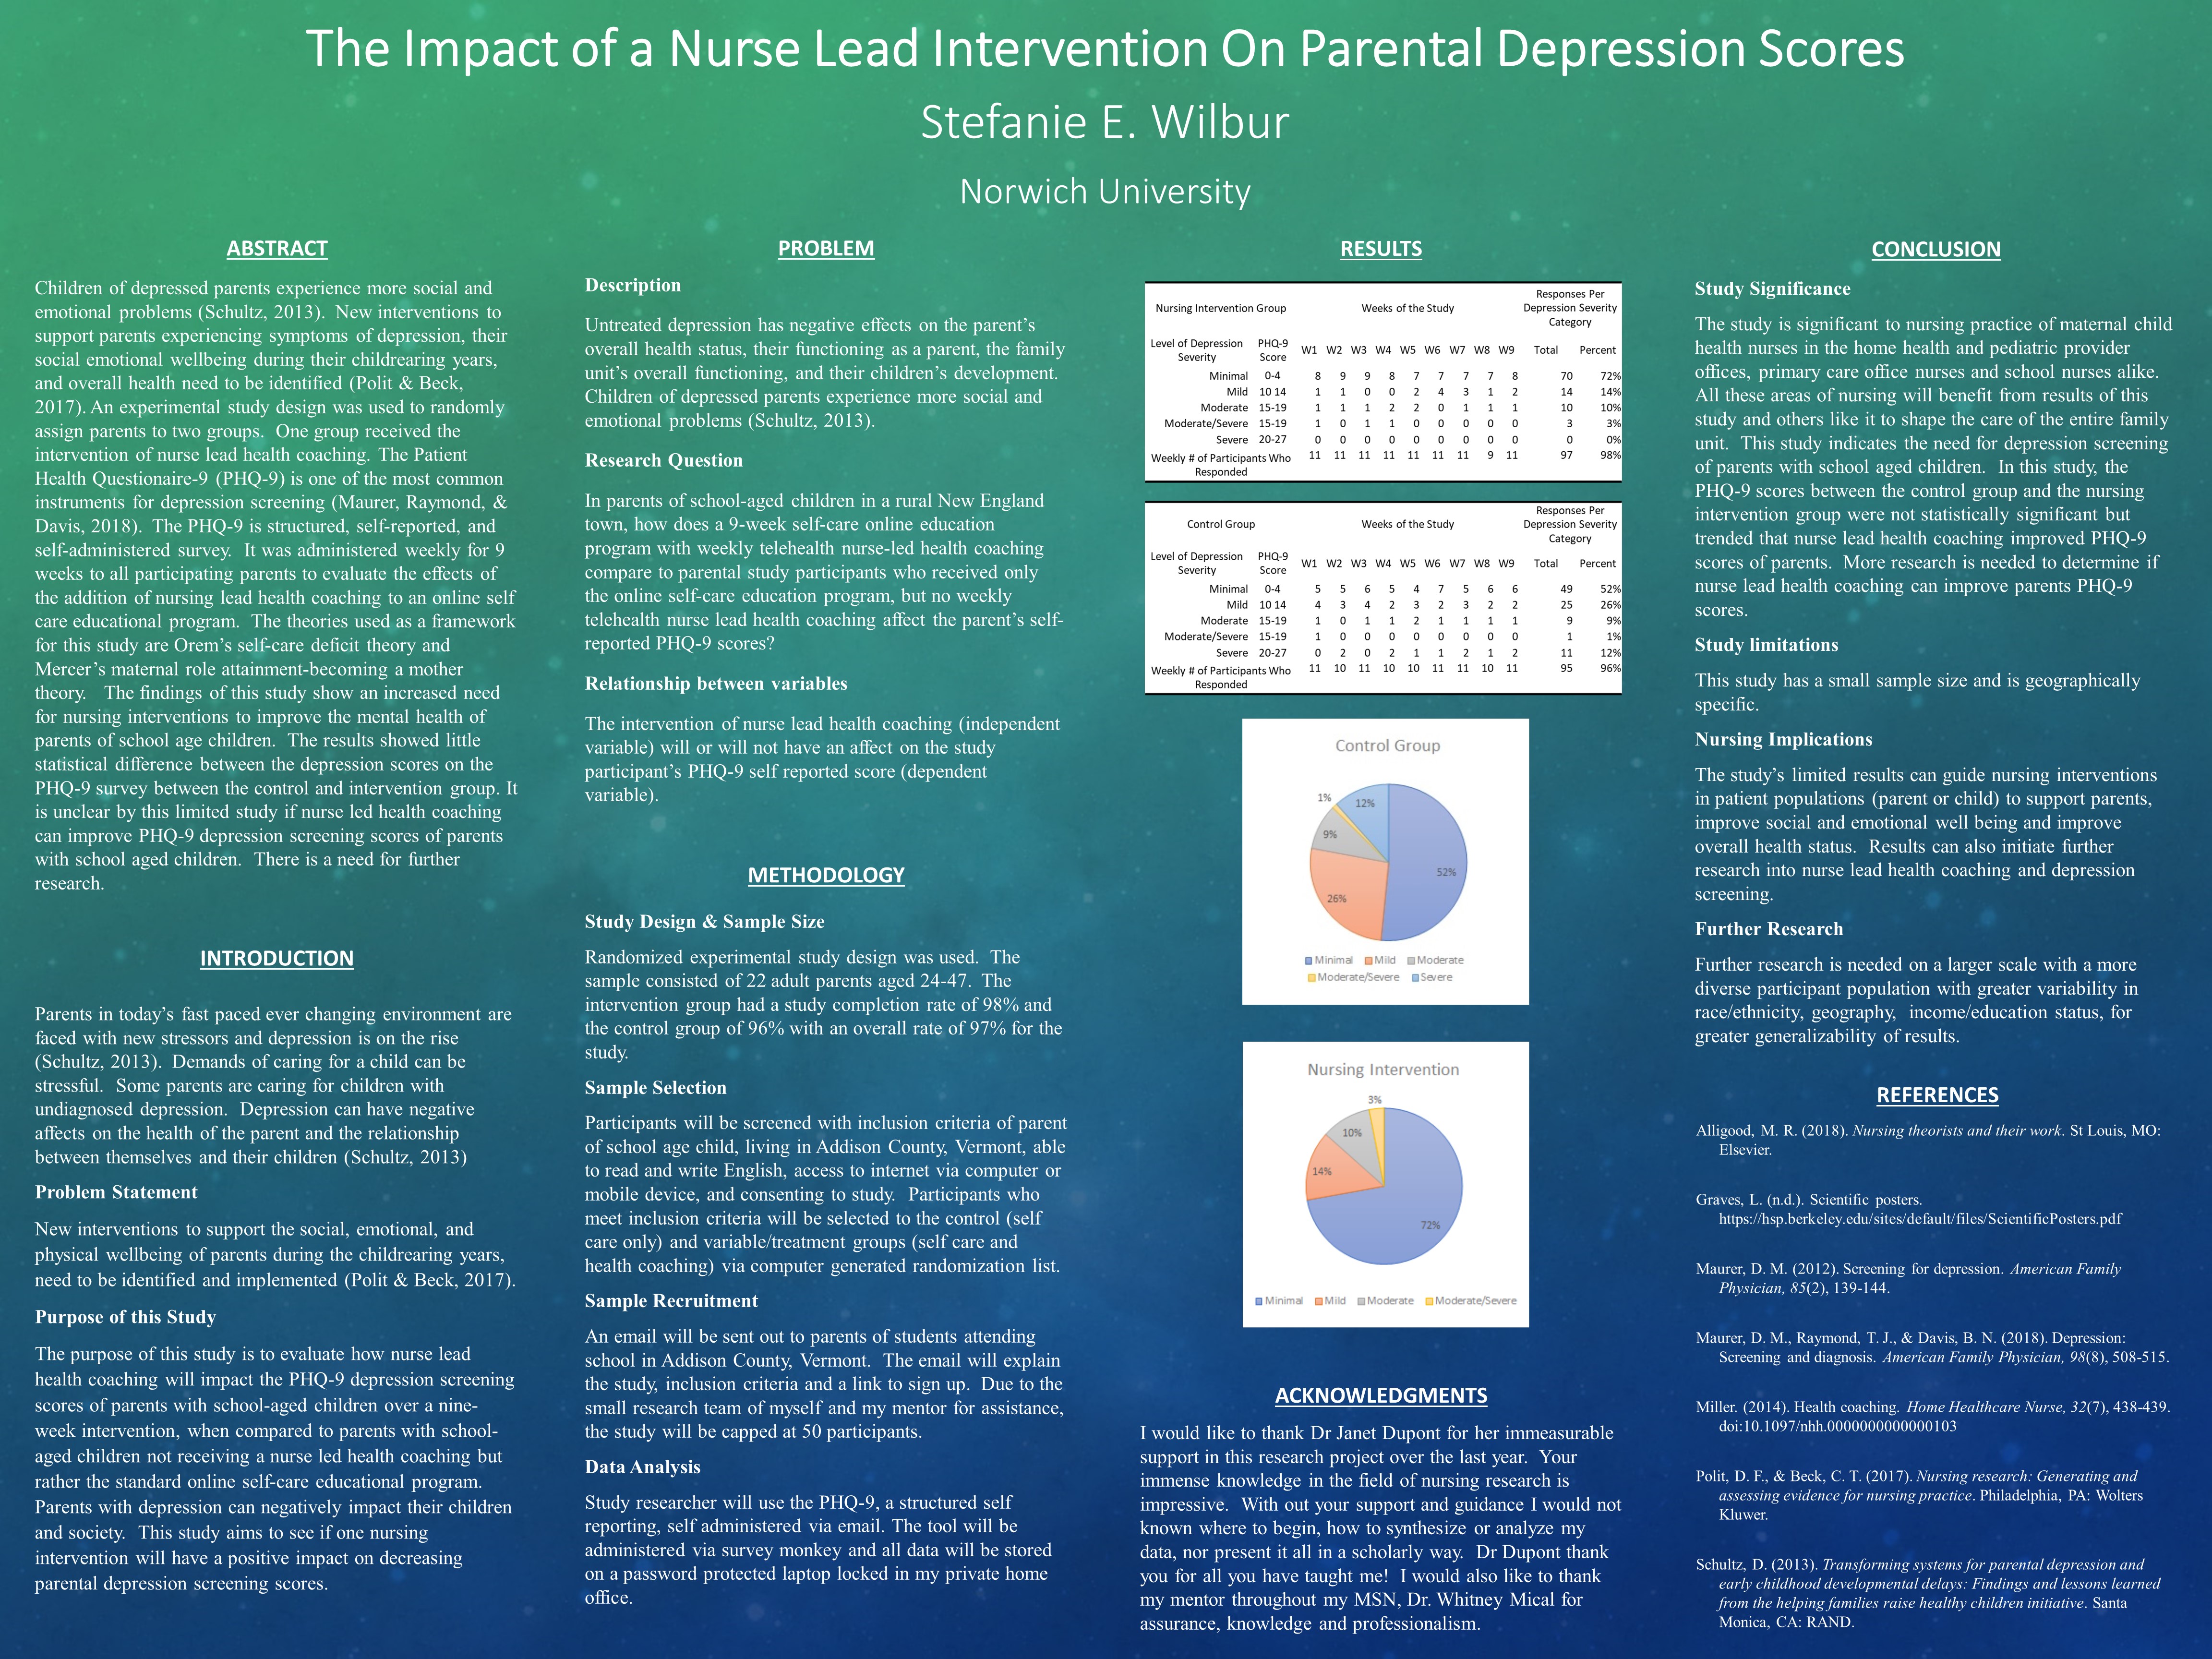 Showcase Image for The Impact of a Nurse Lead Intervention On Parental Depression Scores